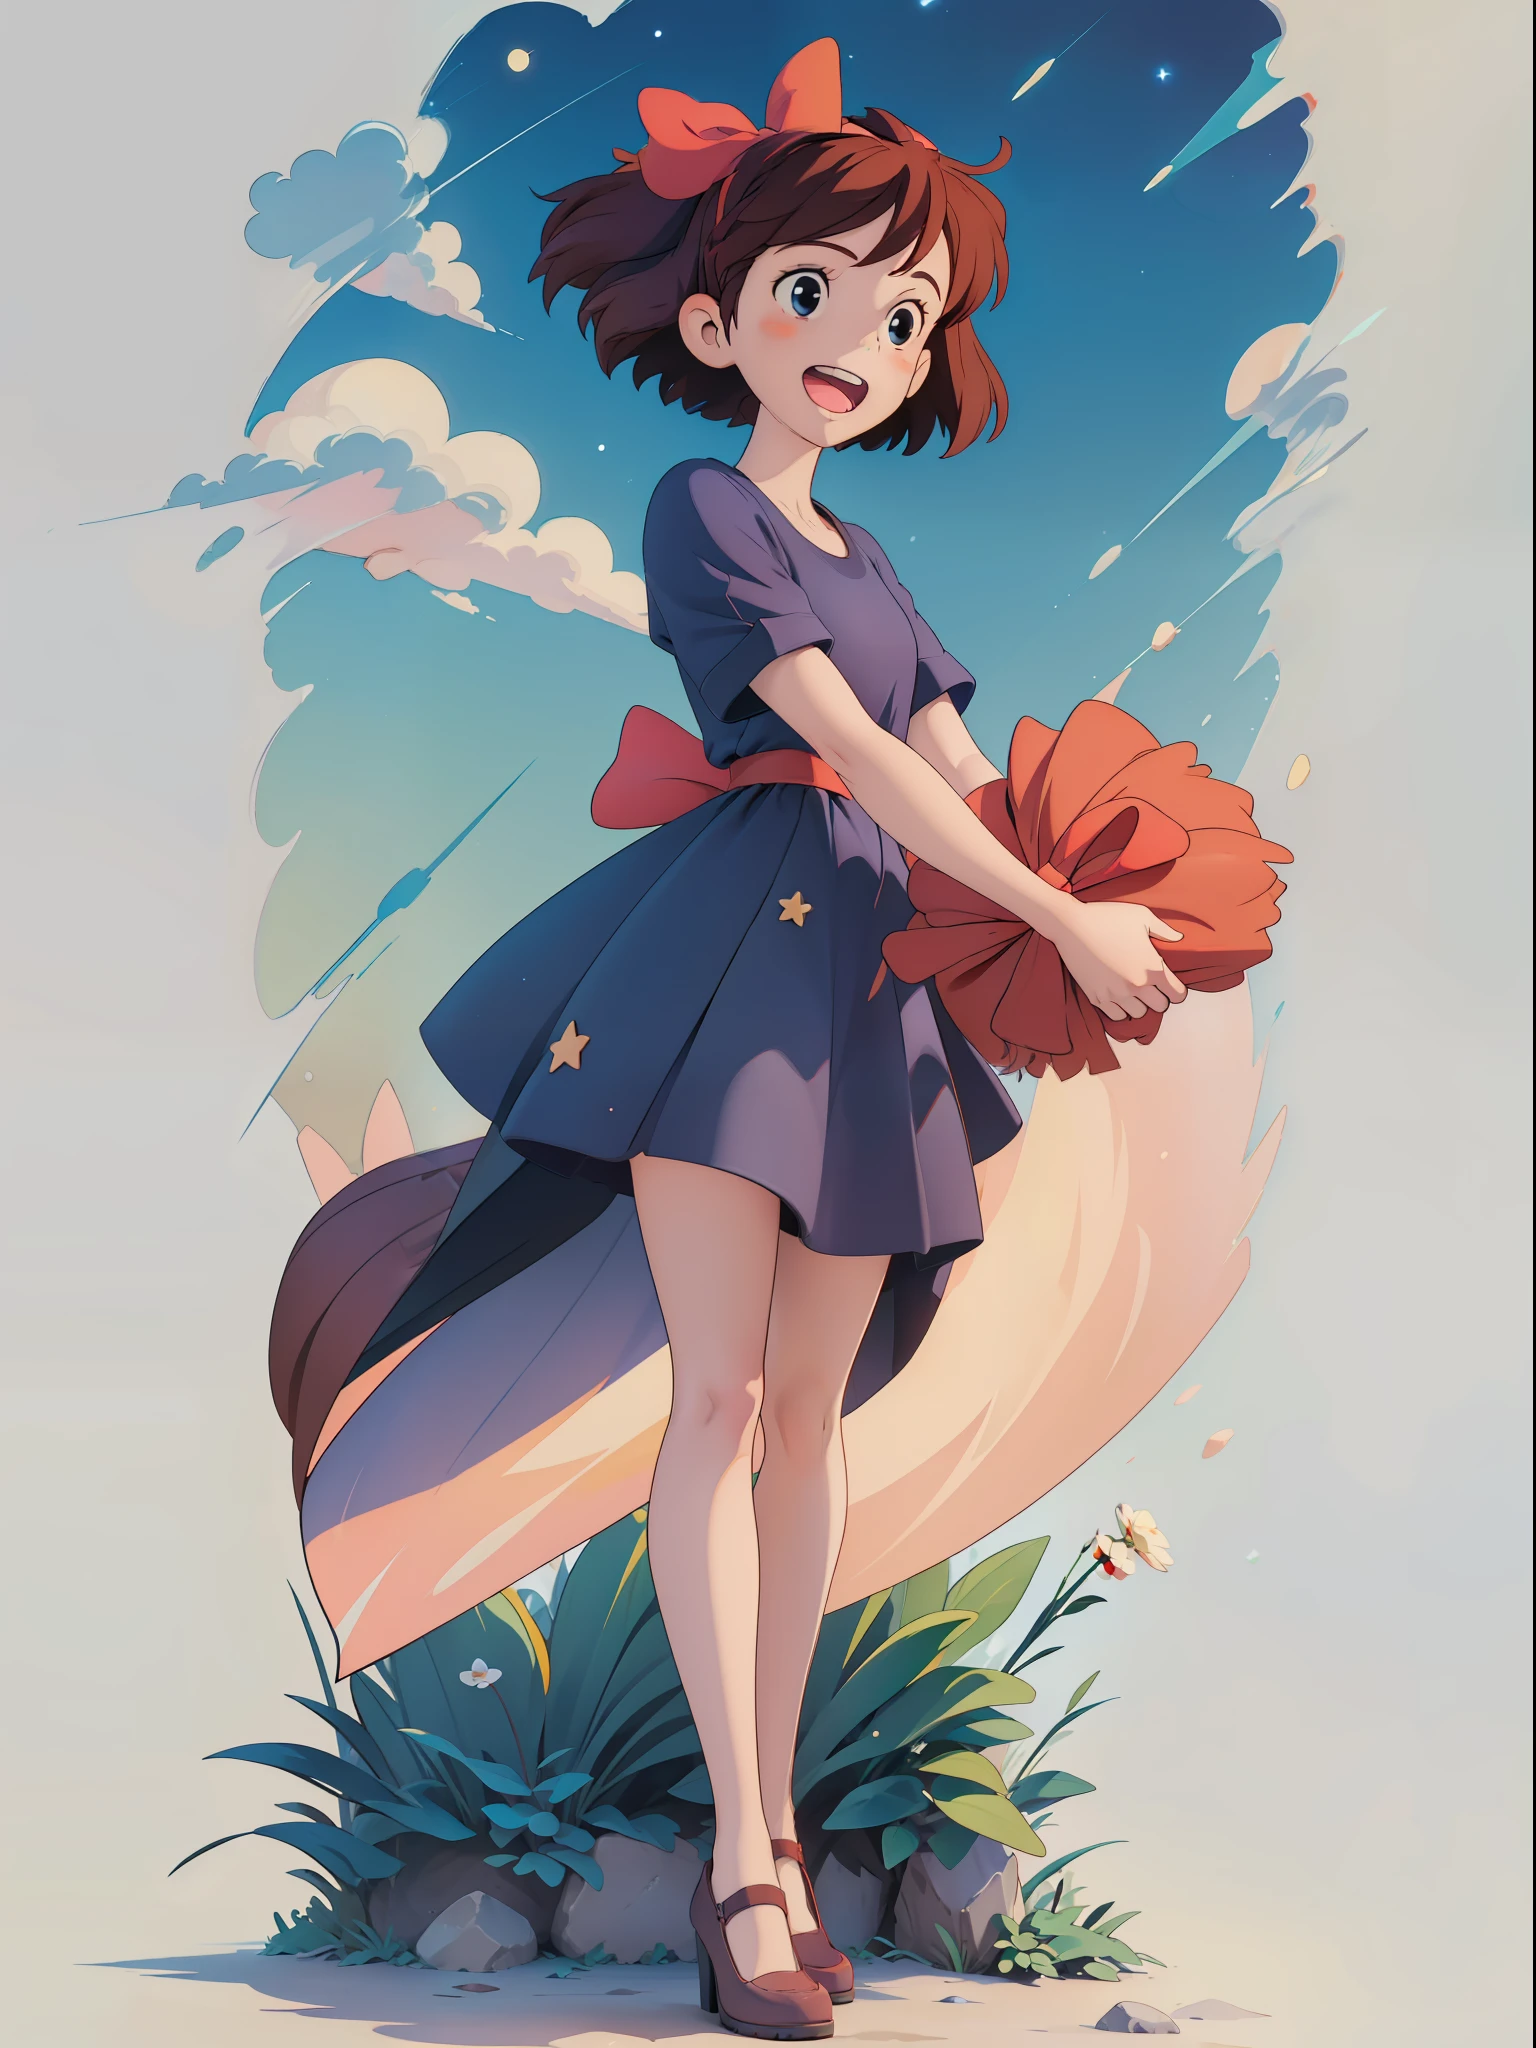 (Masterpiece:1.2), (high qulity:1.2), 1girll, full body Kiki, cheerfulness, big red hairtie, dark blue short dress, Surrounded by stars, High details, Realistic, Photography, white flat background, soft focus